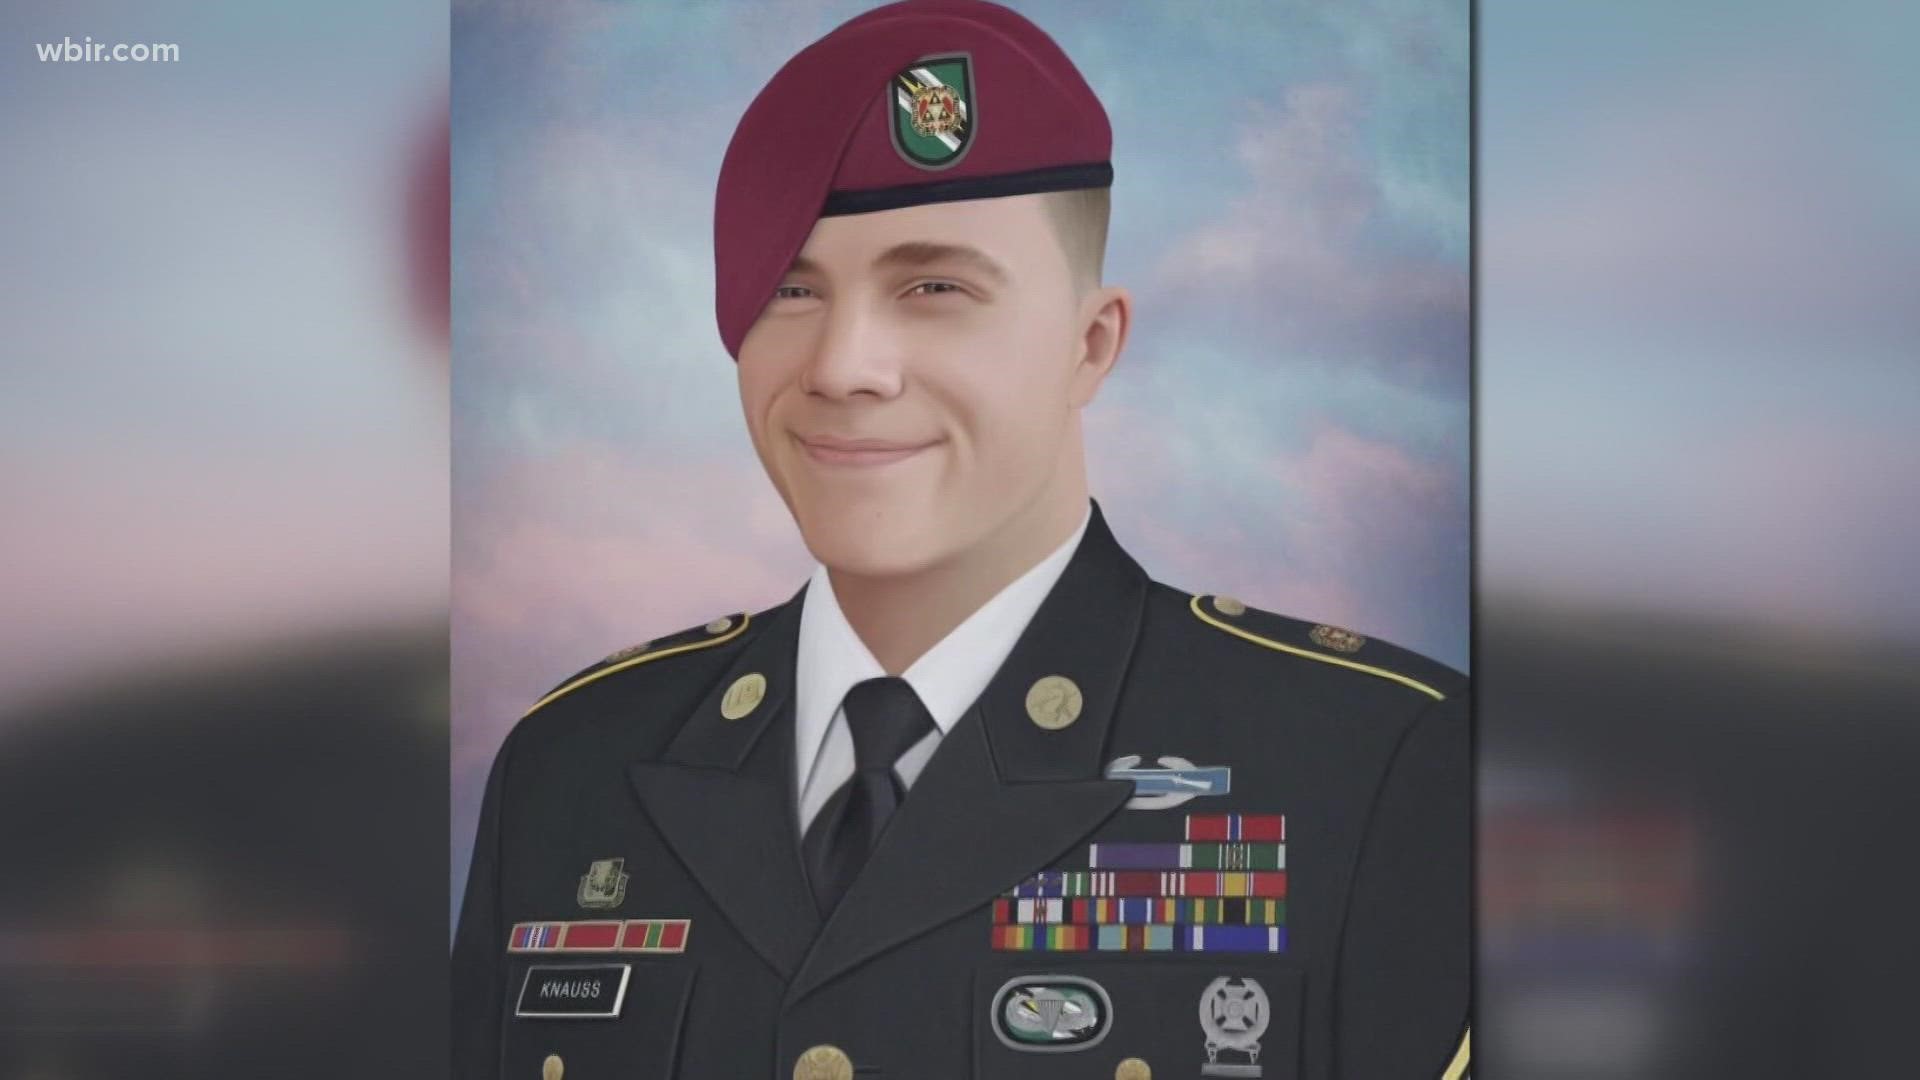 “He was making everybody better and he was making himself better," said First Sgt. Michael Dean, who served with Knoxville Staff Sergeant Ryan Knauss in Afghanistan.